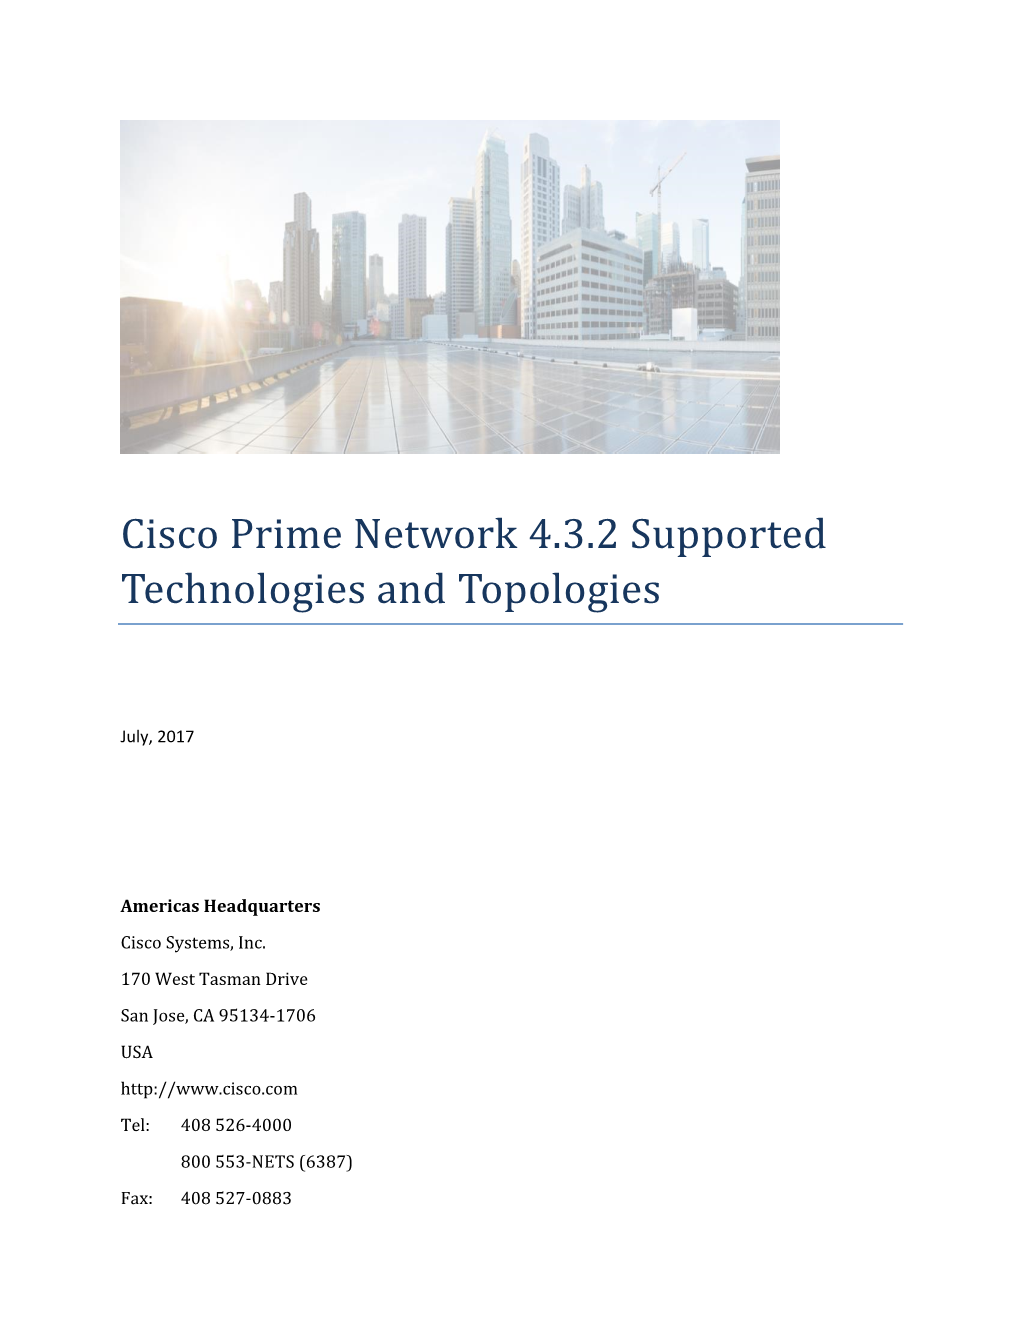 Cisco Prime Network Supported Technologies and Topologies, 4-3.2